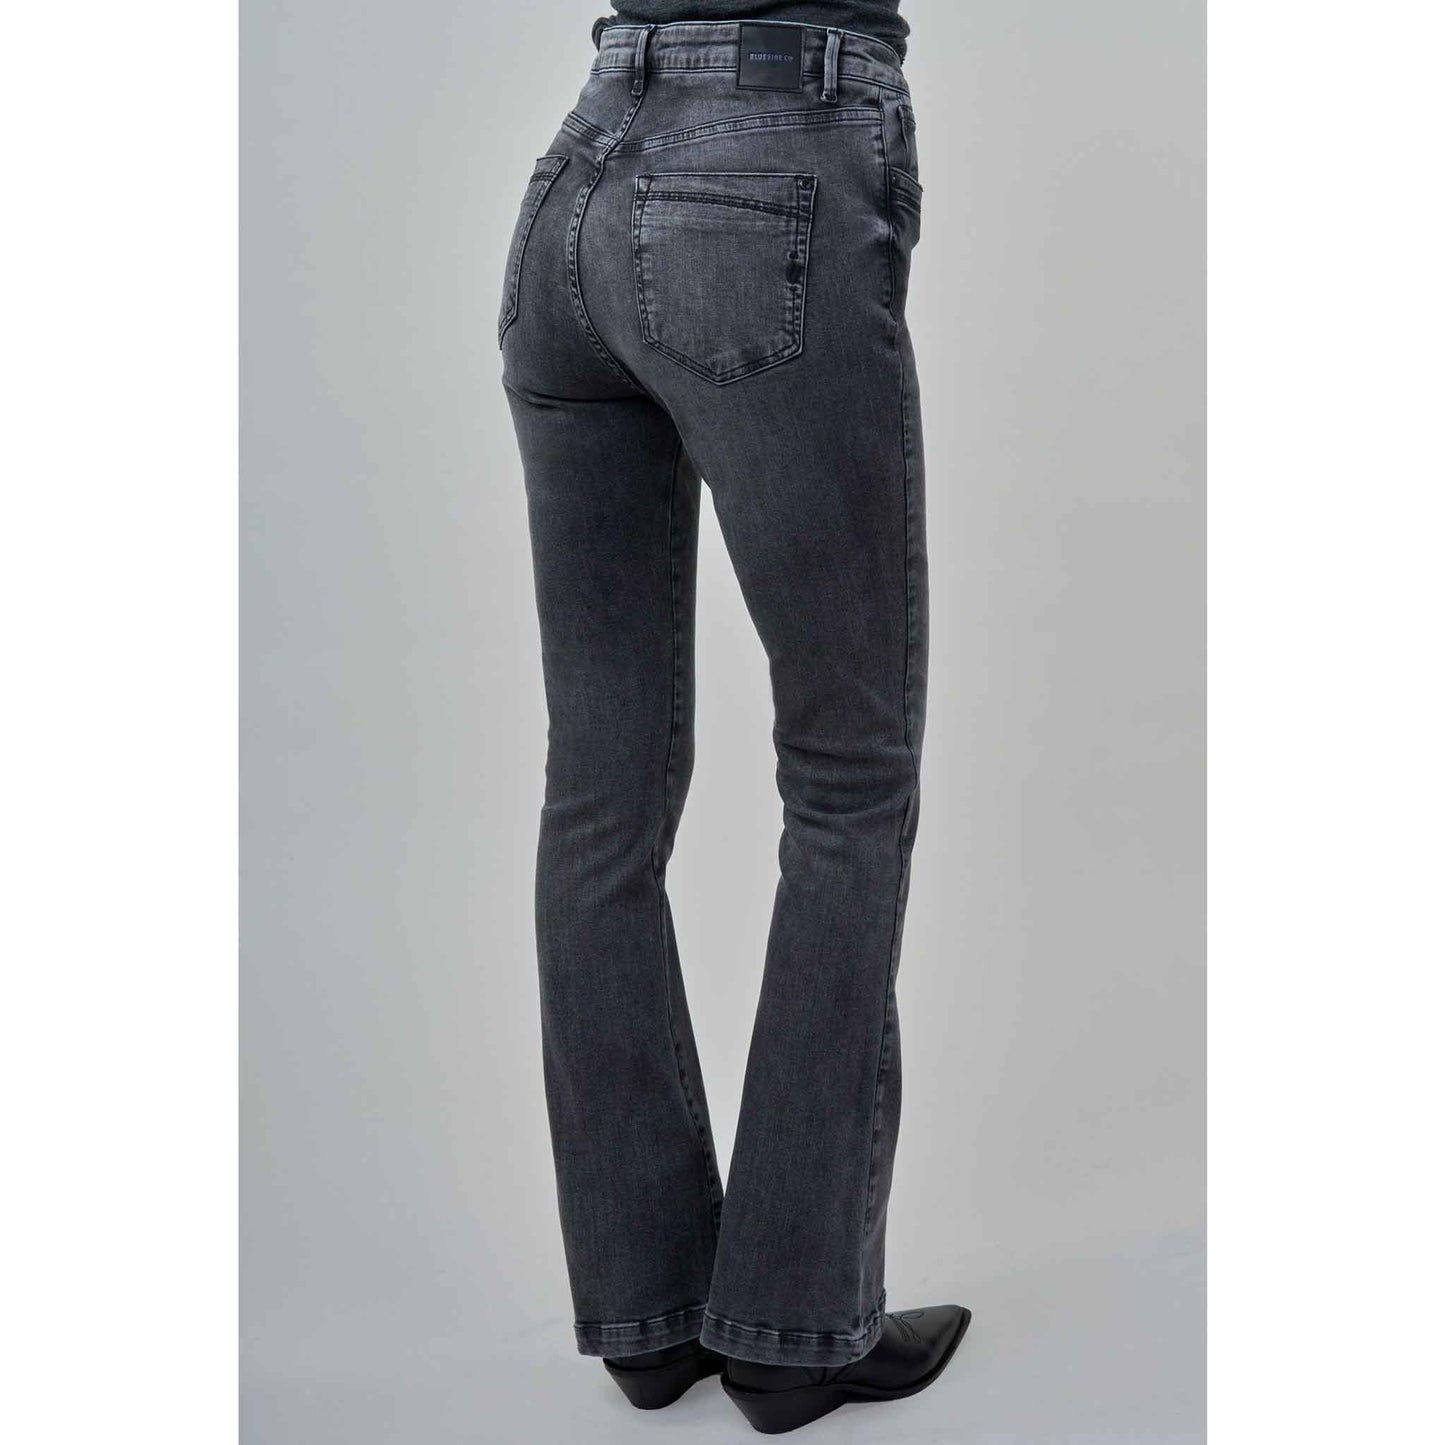 clothing tall women bluefire jeans vicky gray